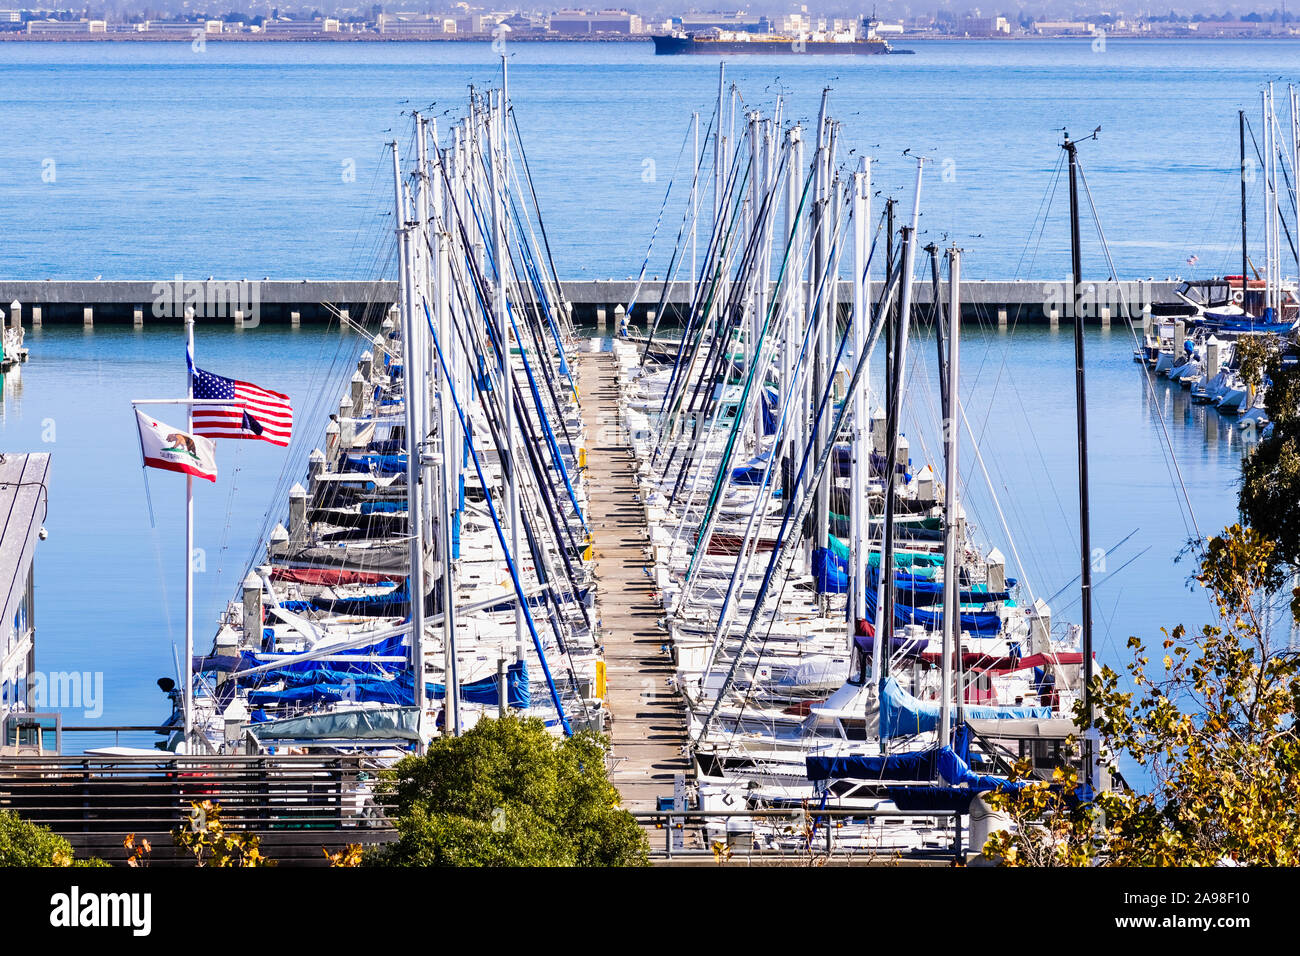 Nov 2, 2019 San Francisco / CA / USA - Boats moored at the South Beach Harbor; the American flag and the California Republic flag waving in the wind Stock Photo